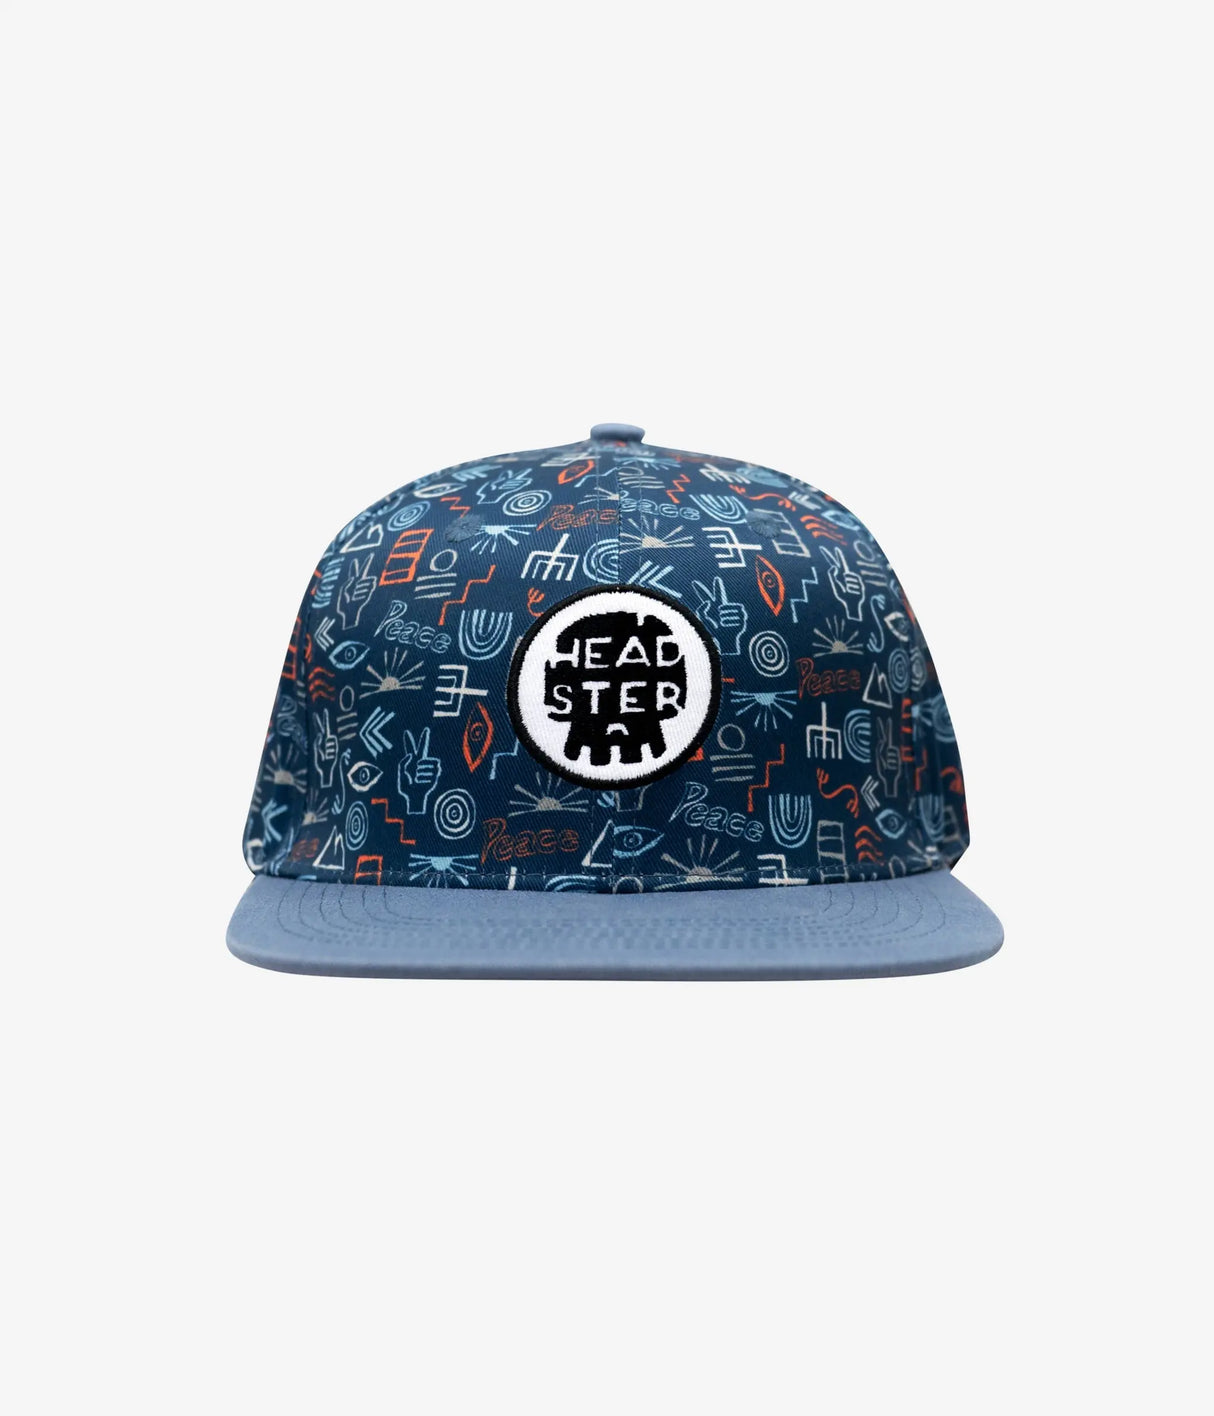 Peace Out Snapback Hat | Headster - Headster